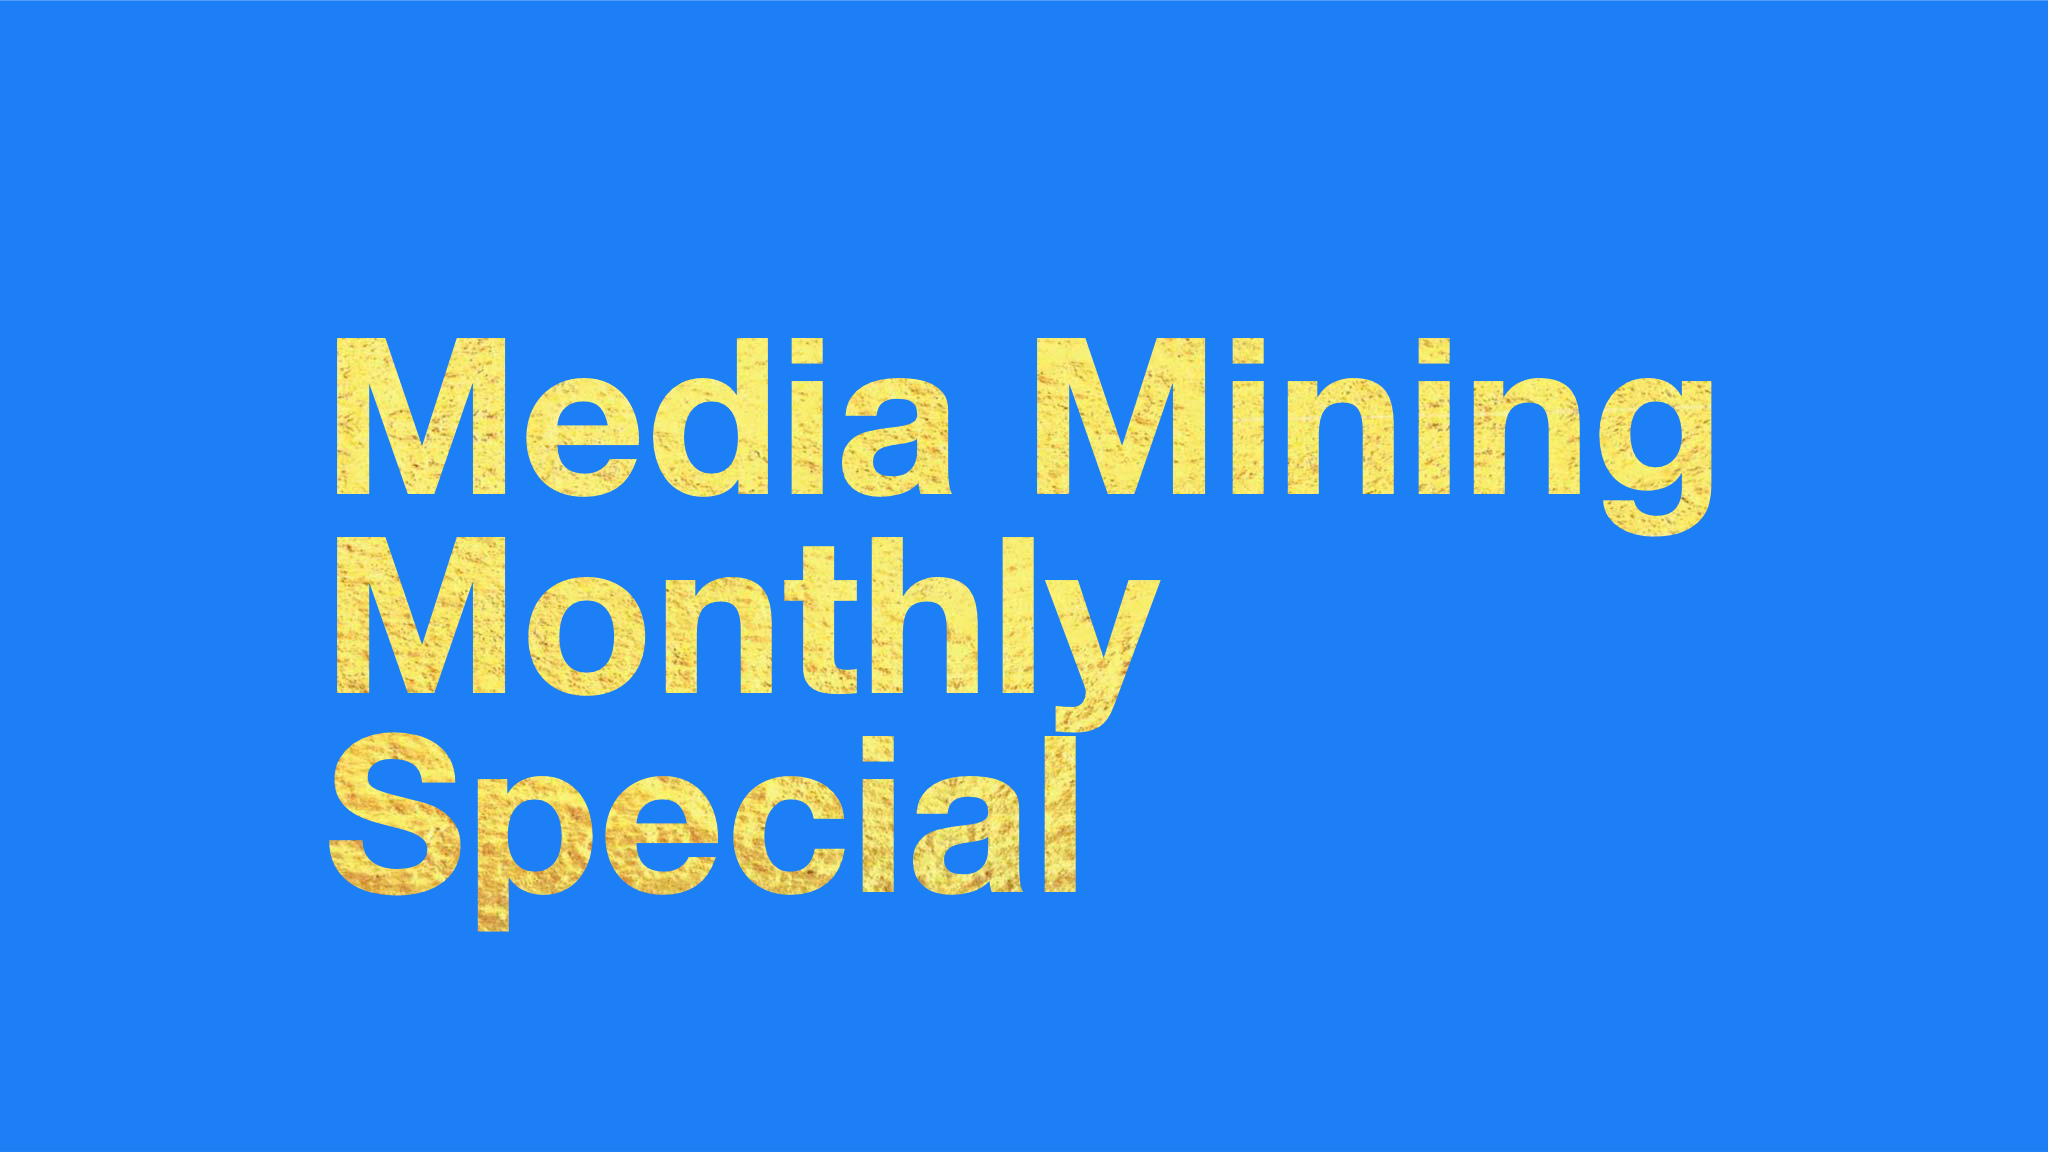 The Media Mining Monthly Special